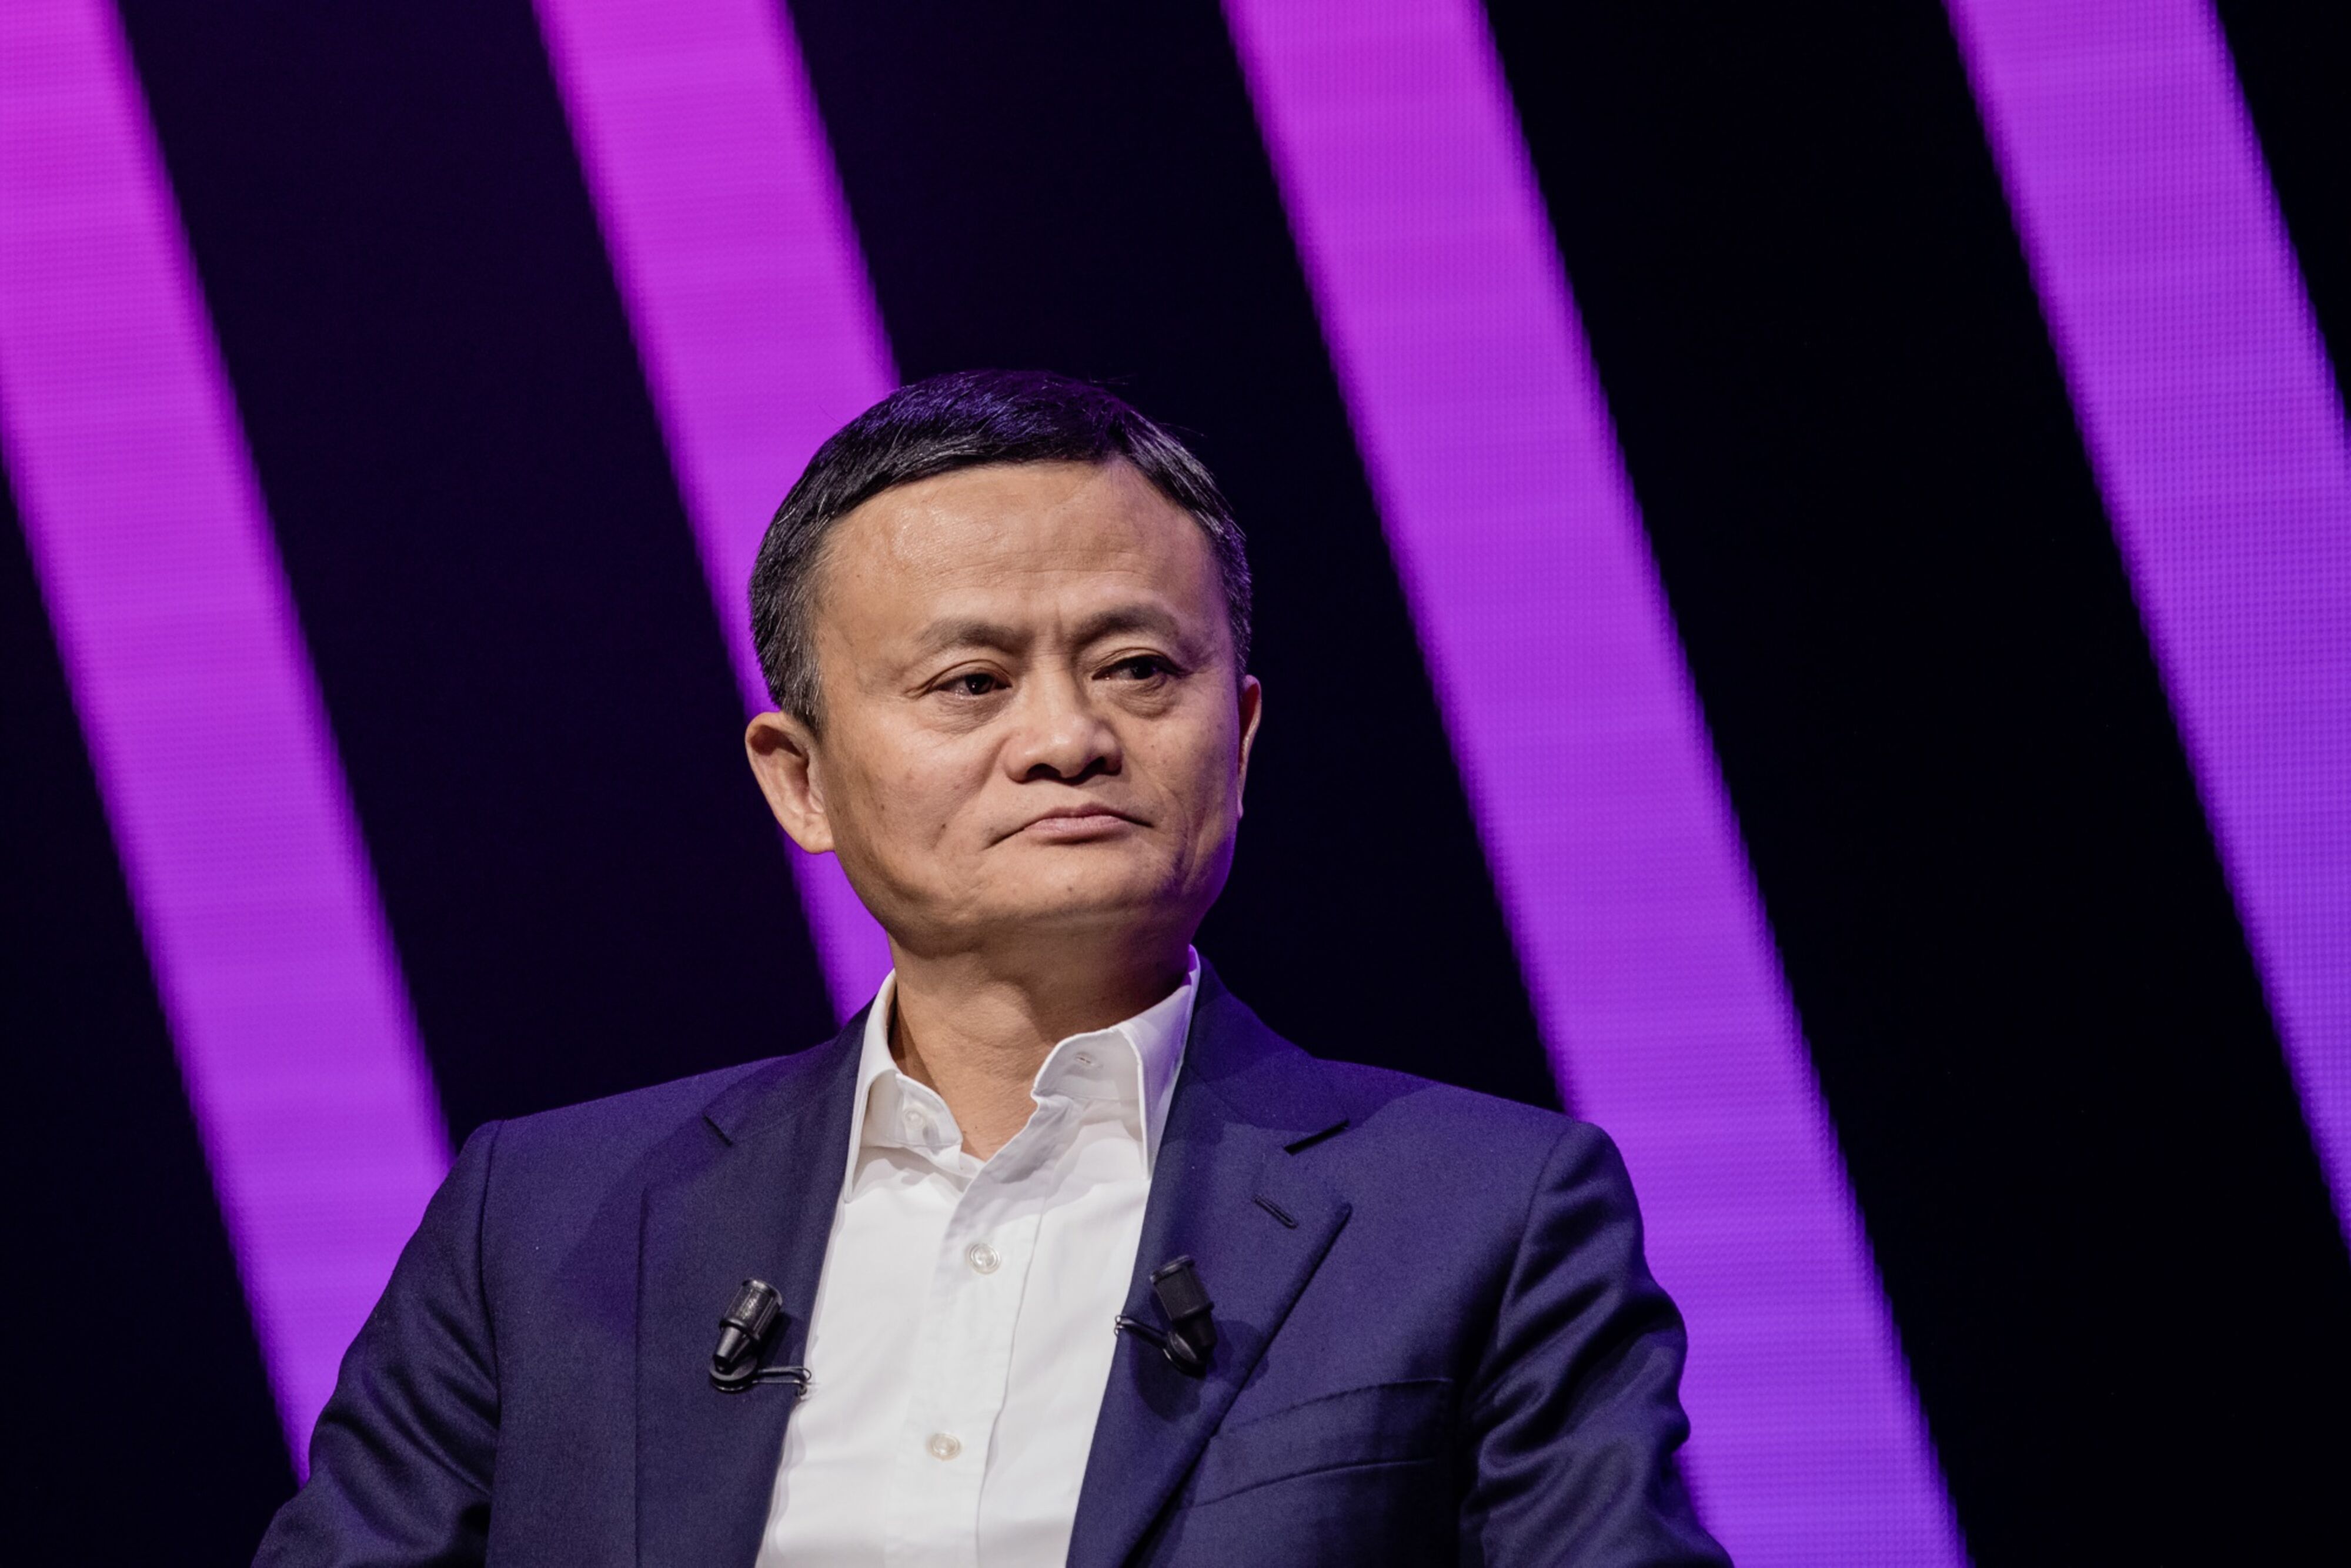 Alibaba is trying to revitalize its sprawling empire that spans e-commerce and cloud services by integrating its separate parts while shedding marginal assets to focus on core businesses. Photo: Bloomberg